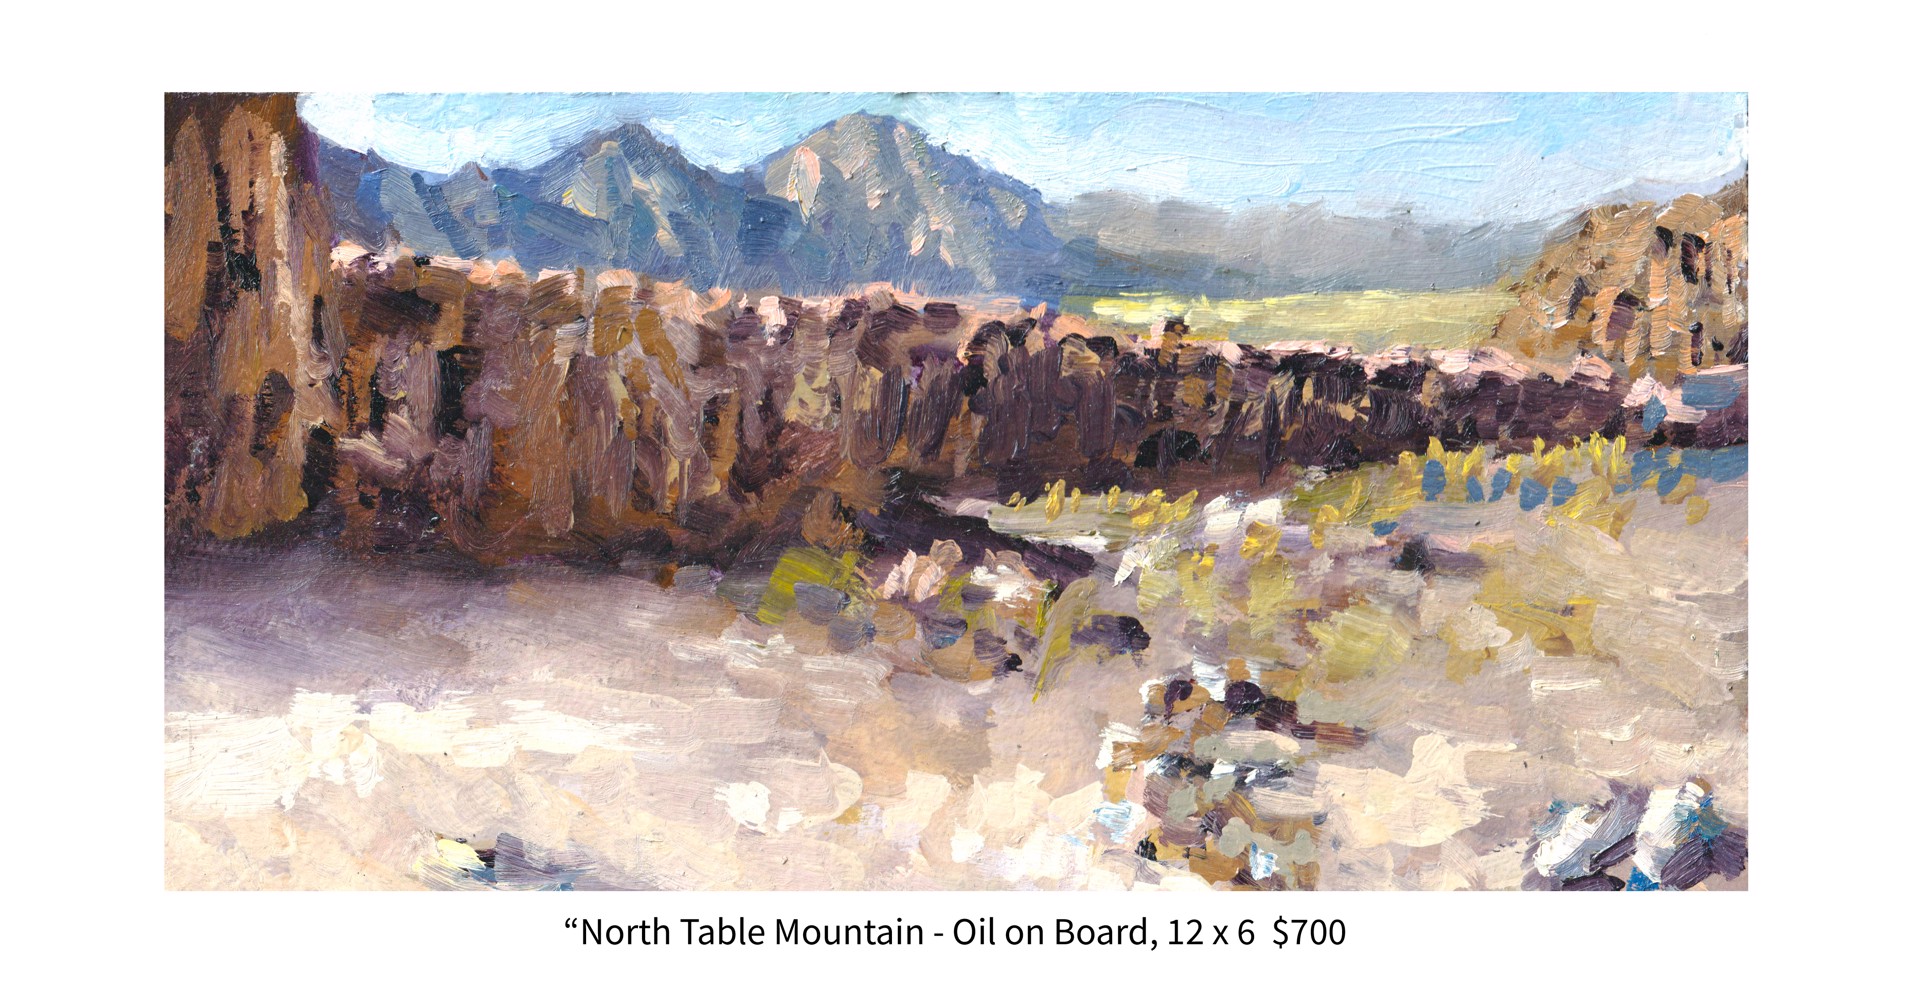 North Table Mountain by Delton Demarest